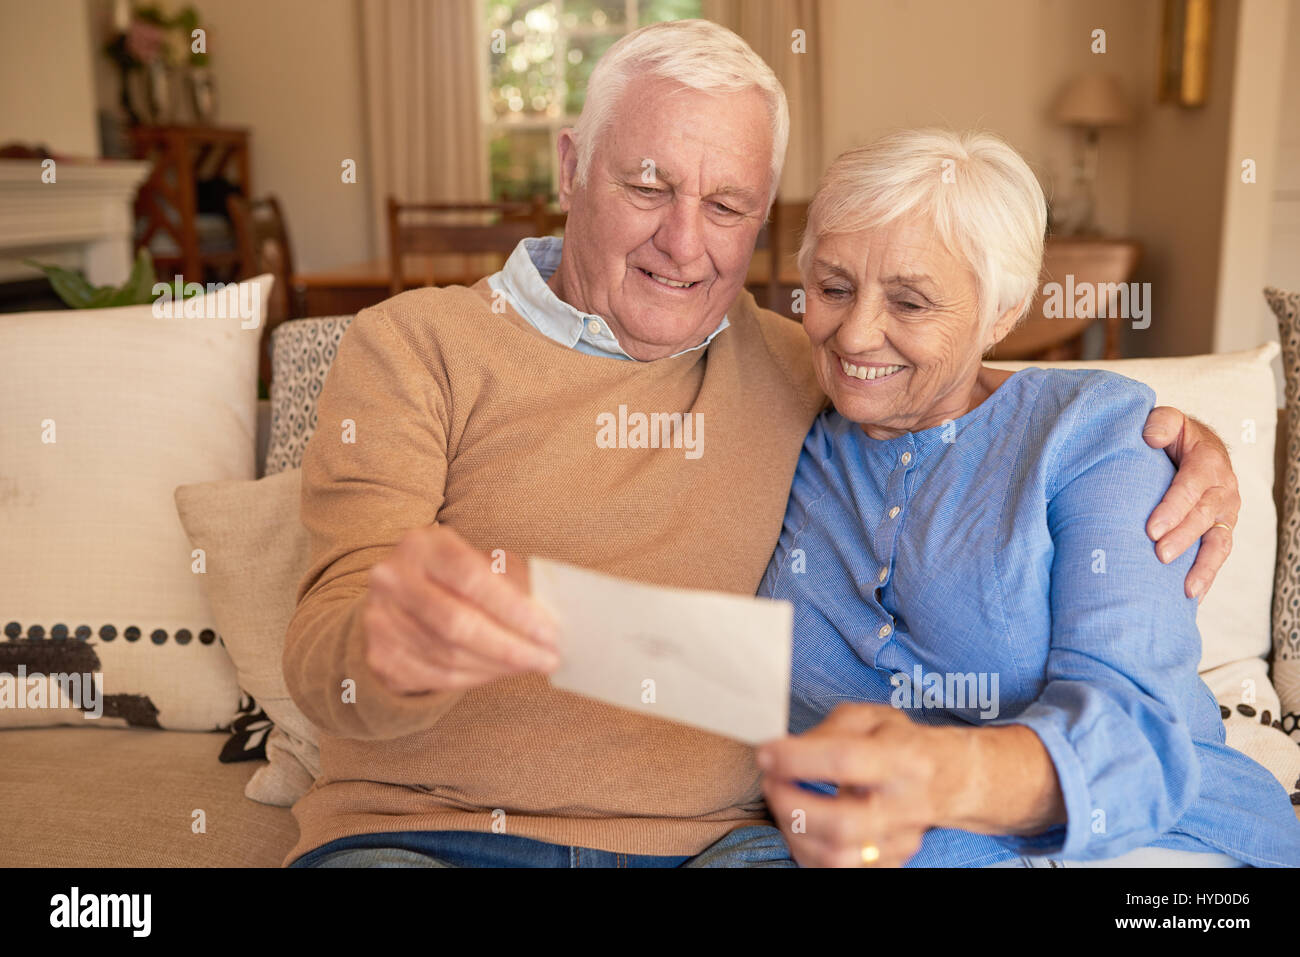 Smiling senior couple looking at old photos together at home Stock Photo